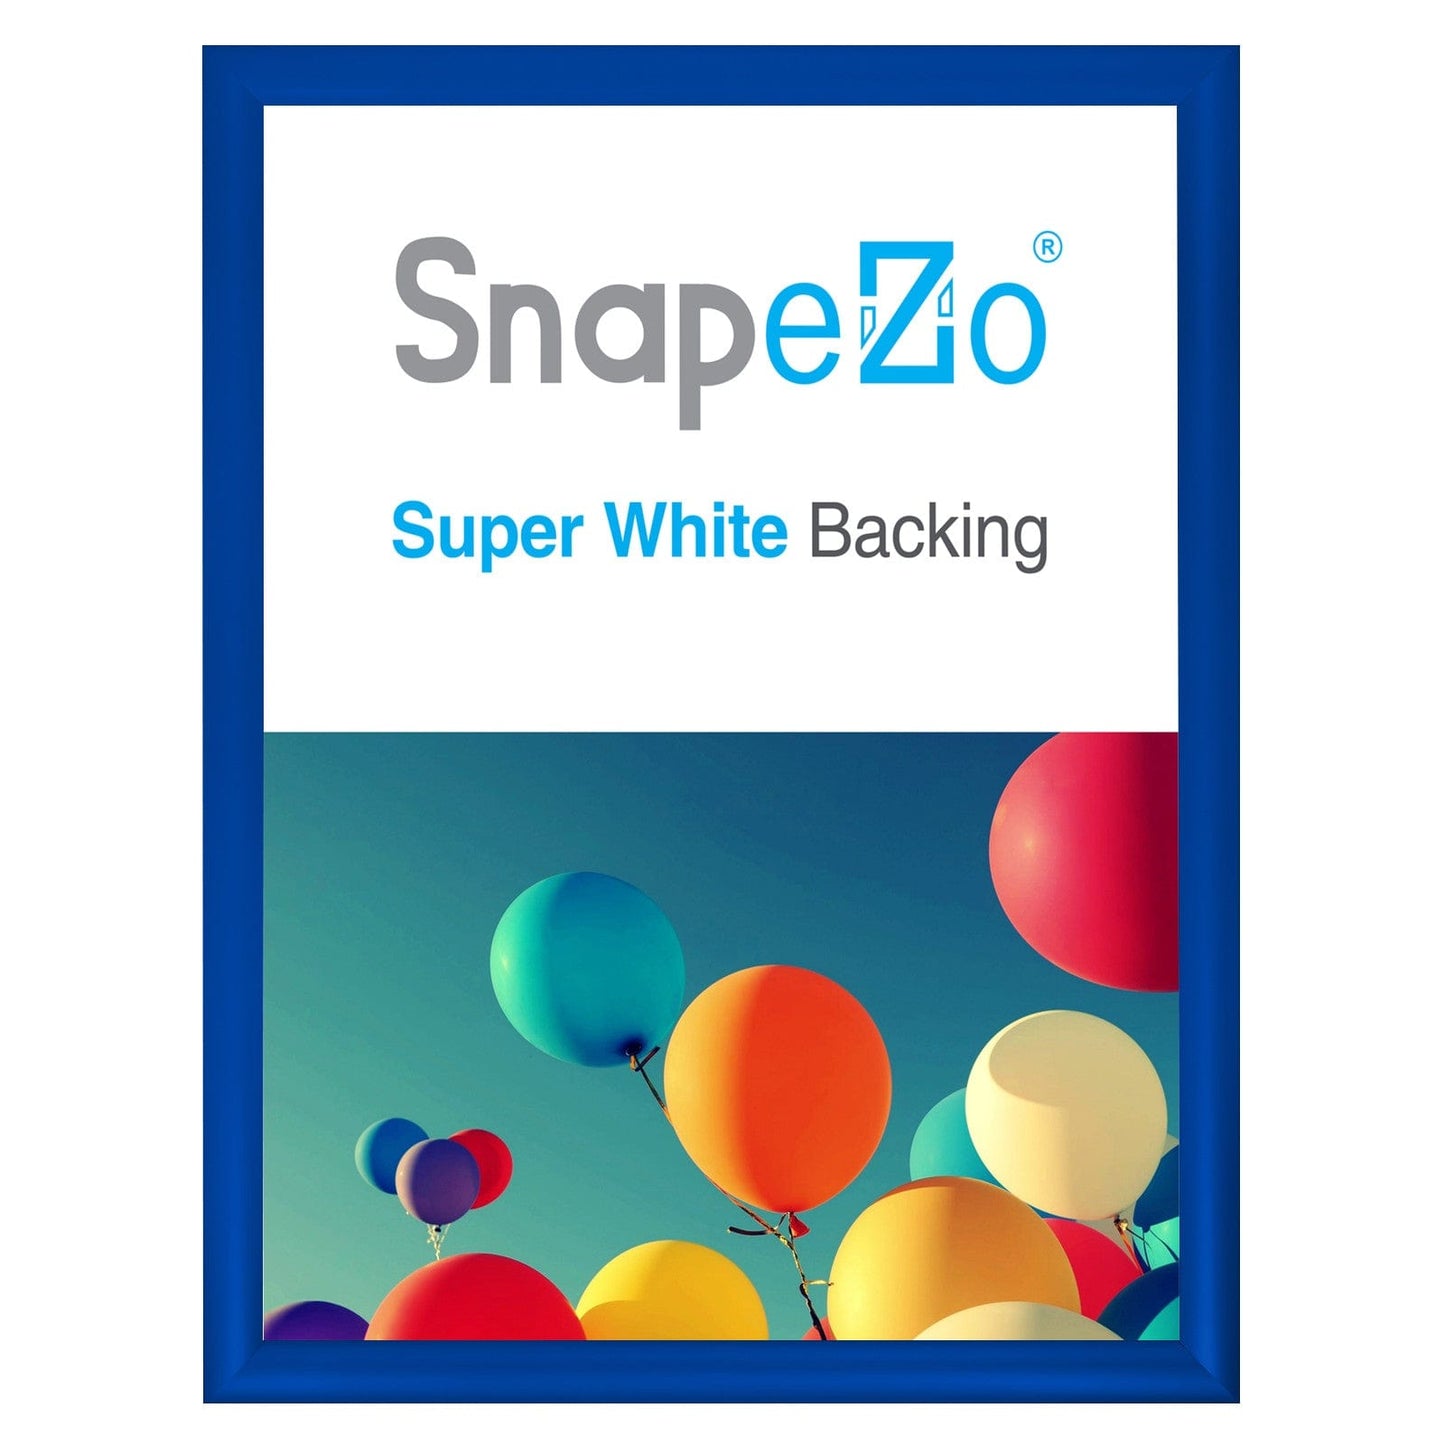 20x26 Blue SnapeZo® Snap Frame - 1.2" Profile - Snap Frames Direct